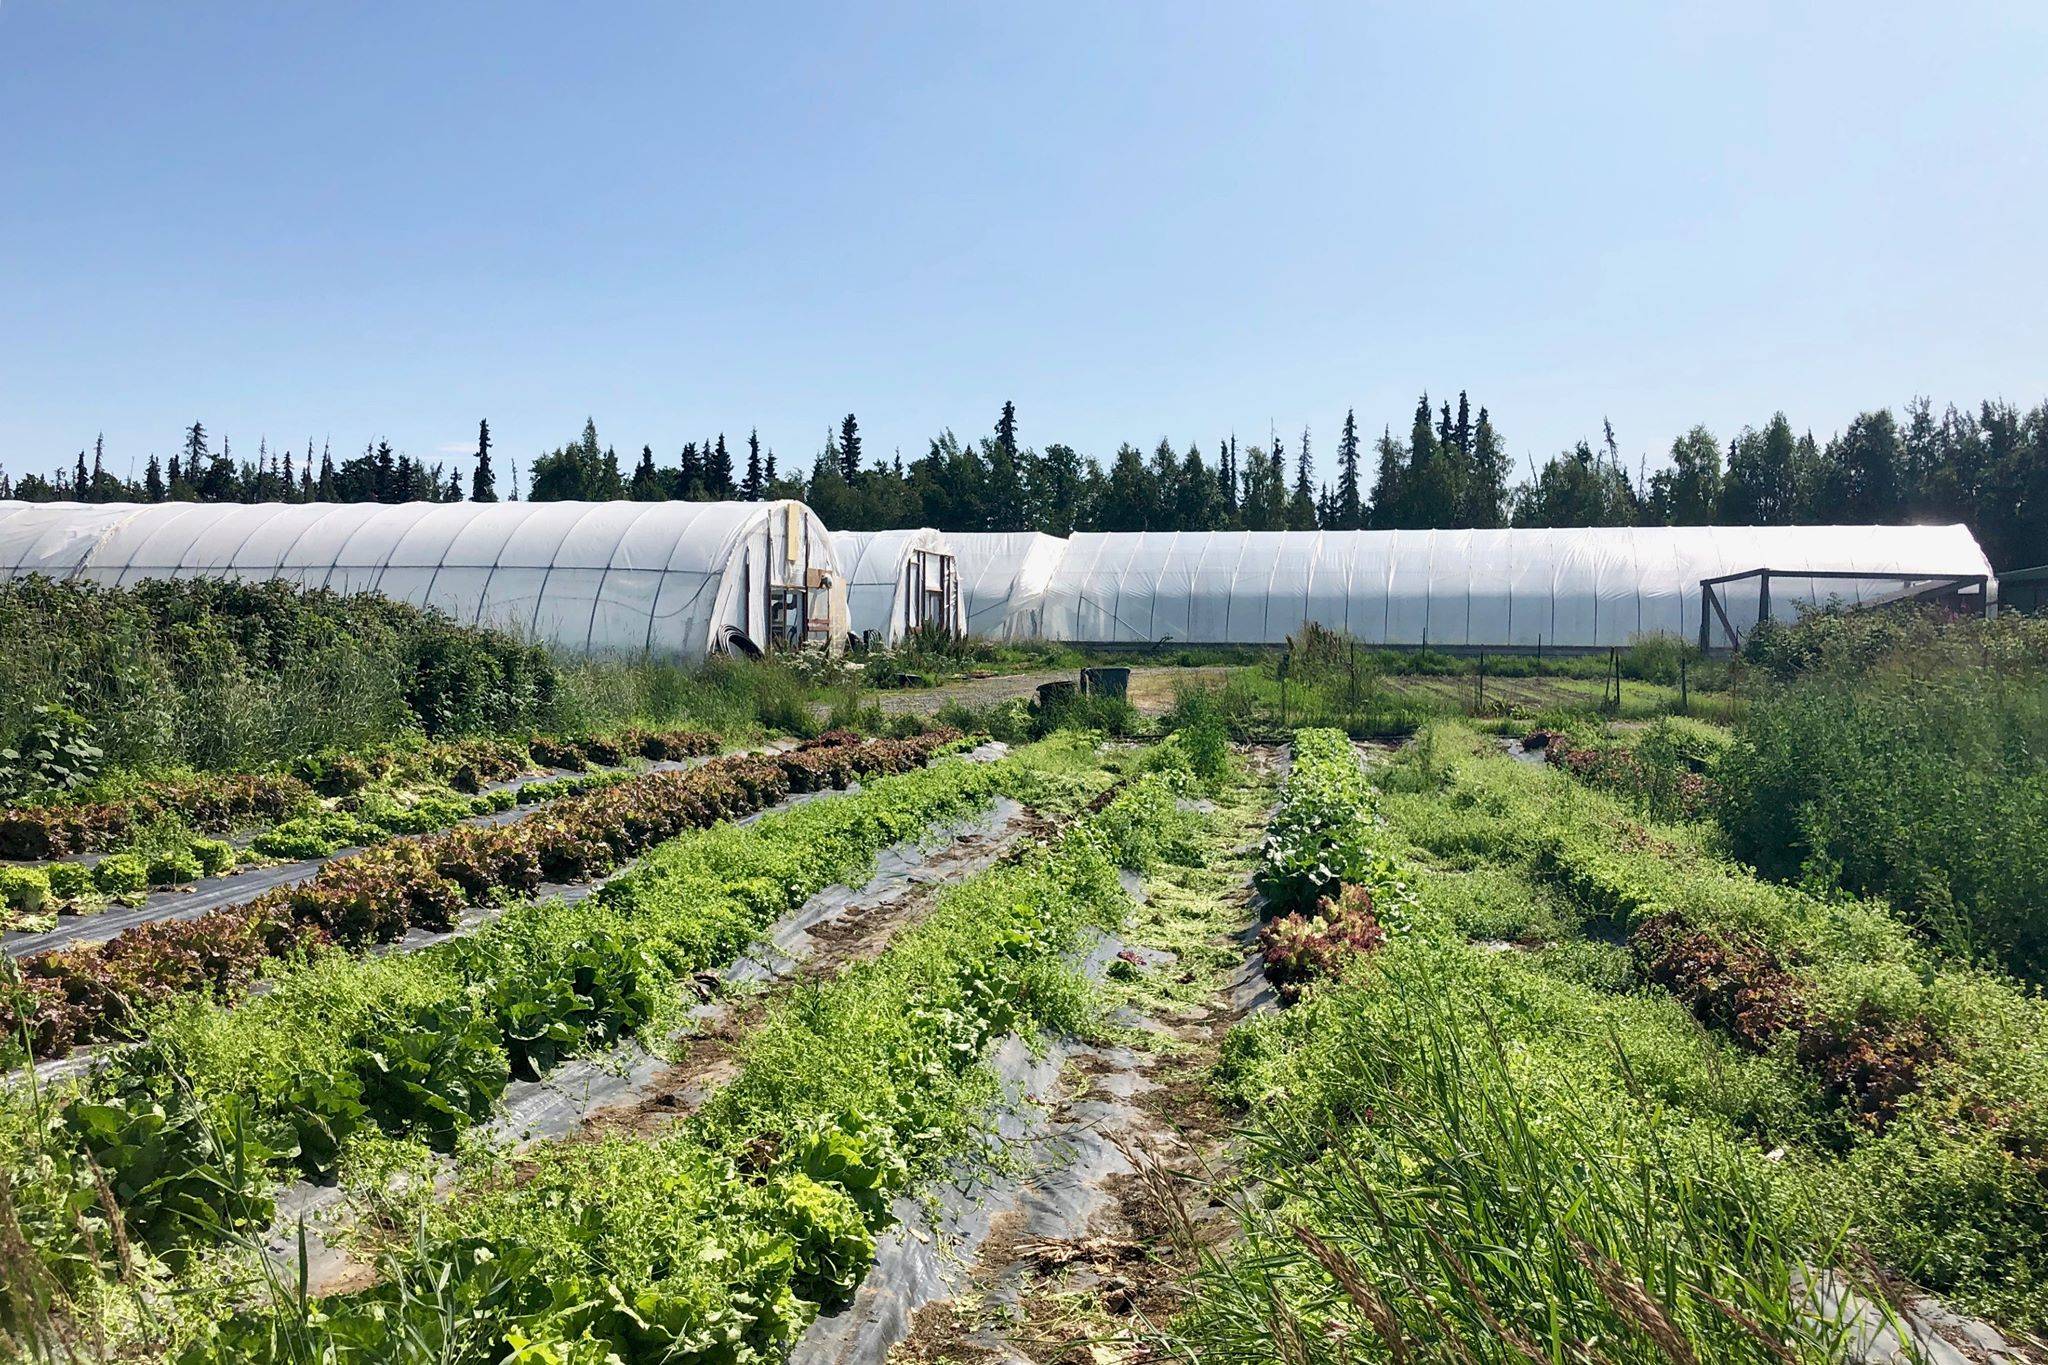 Ridgeway Farms near Soldotna has one of the area’s only community supported agriculture programs, which helps distribute locally grown produce to local residents, Wednesday, July 17, 2019, near Soldotna, Alaska. (Photo by Victoria Petersen/Peninsula Clarion)